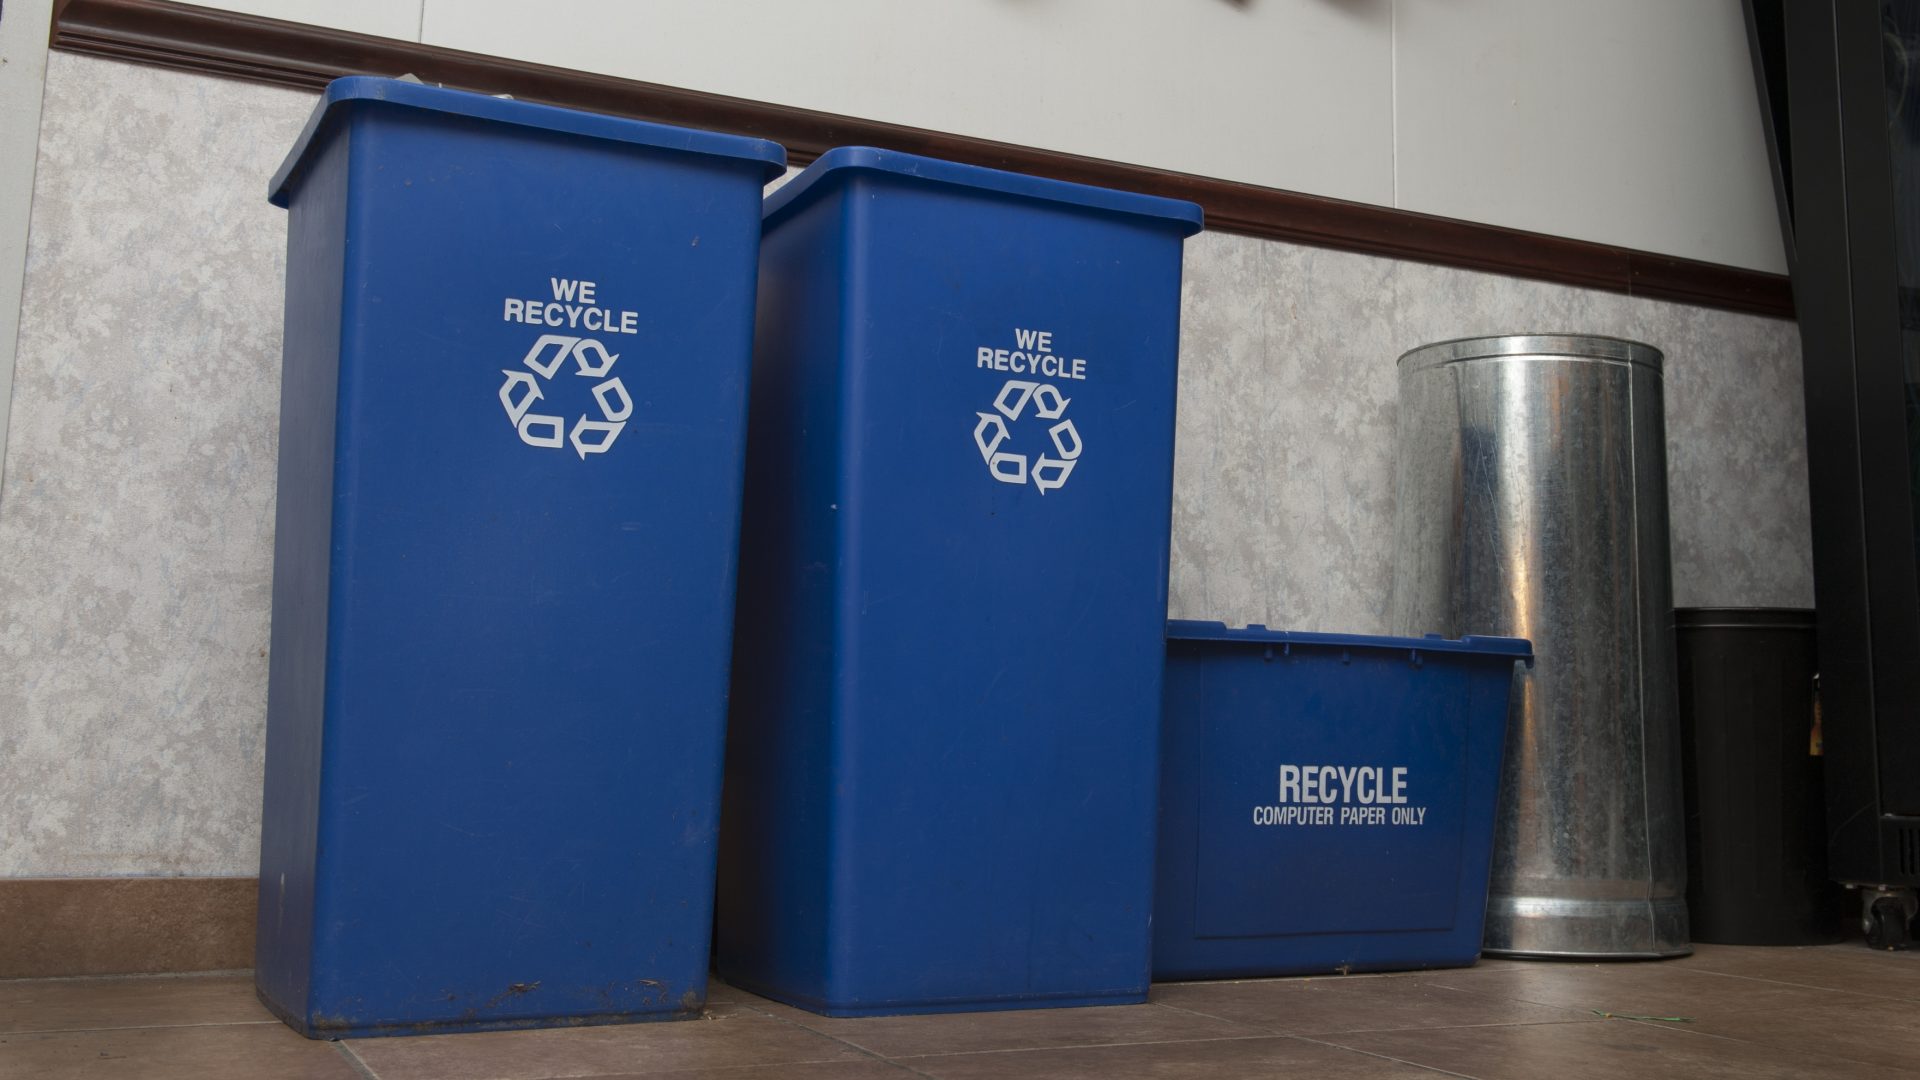 Recycling: Every Airman must do their part